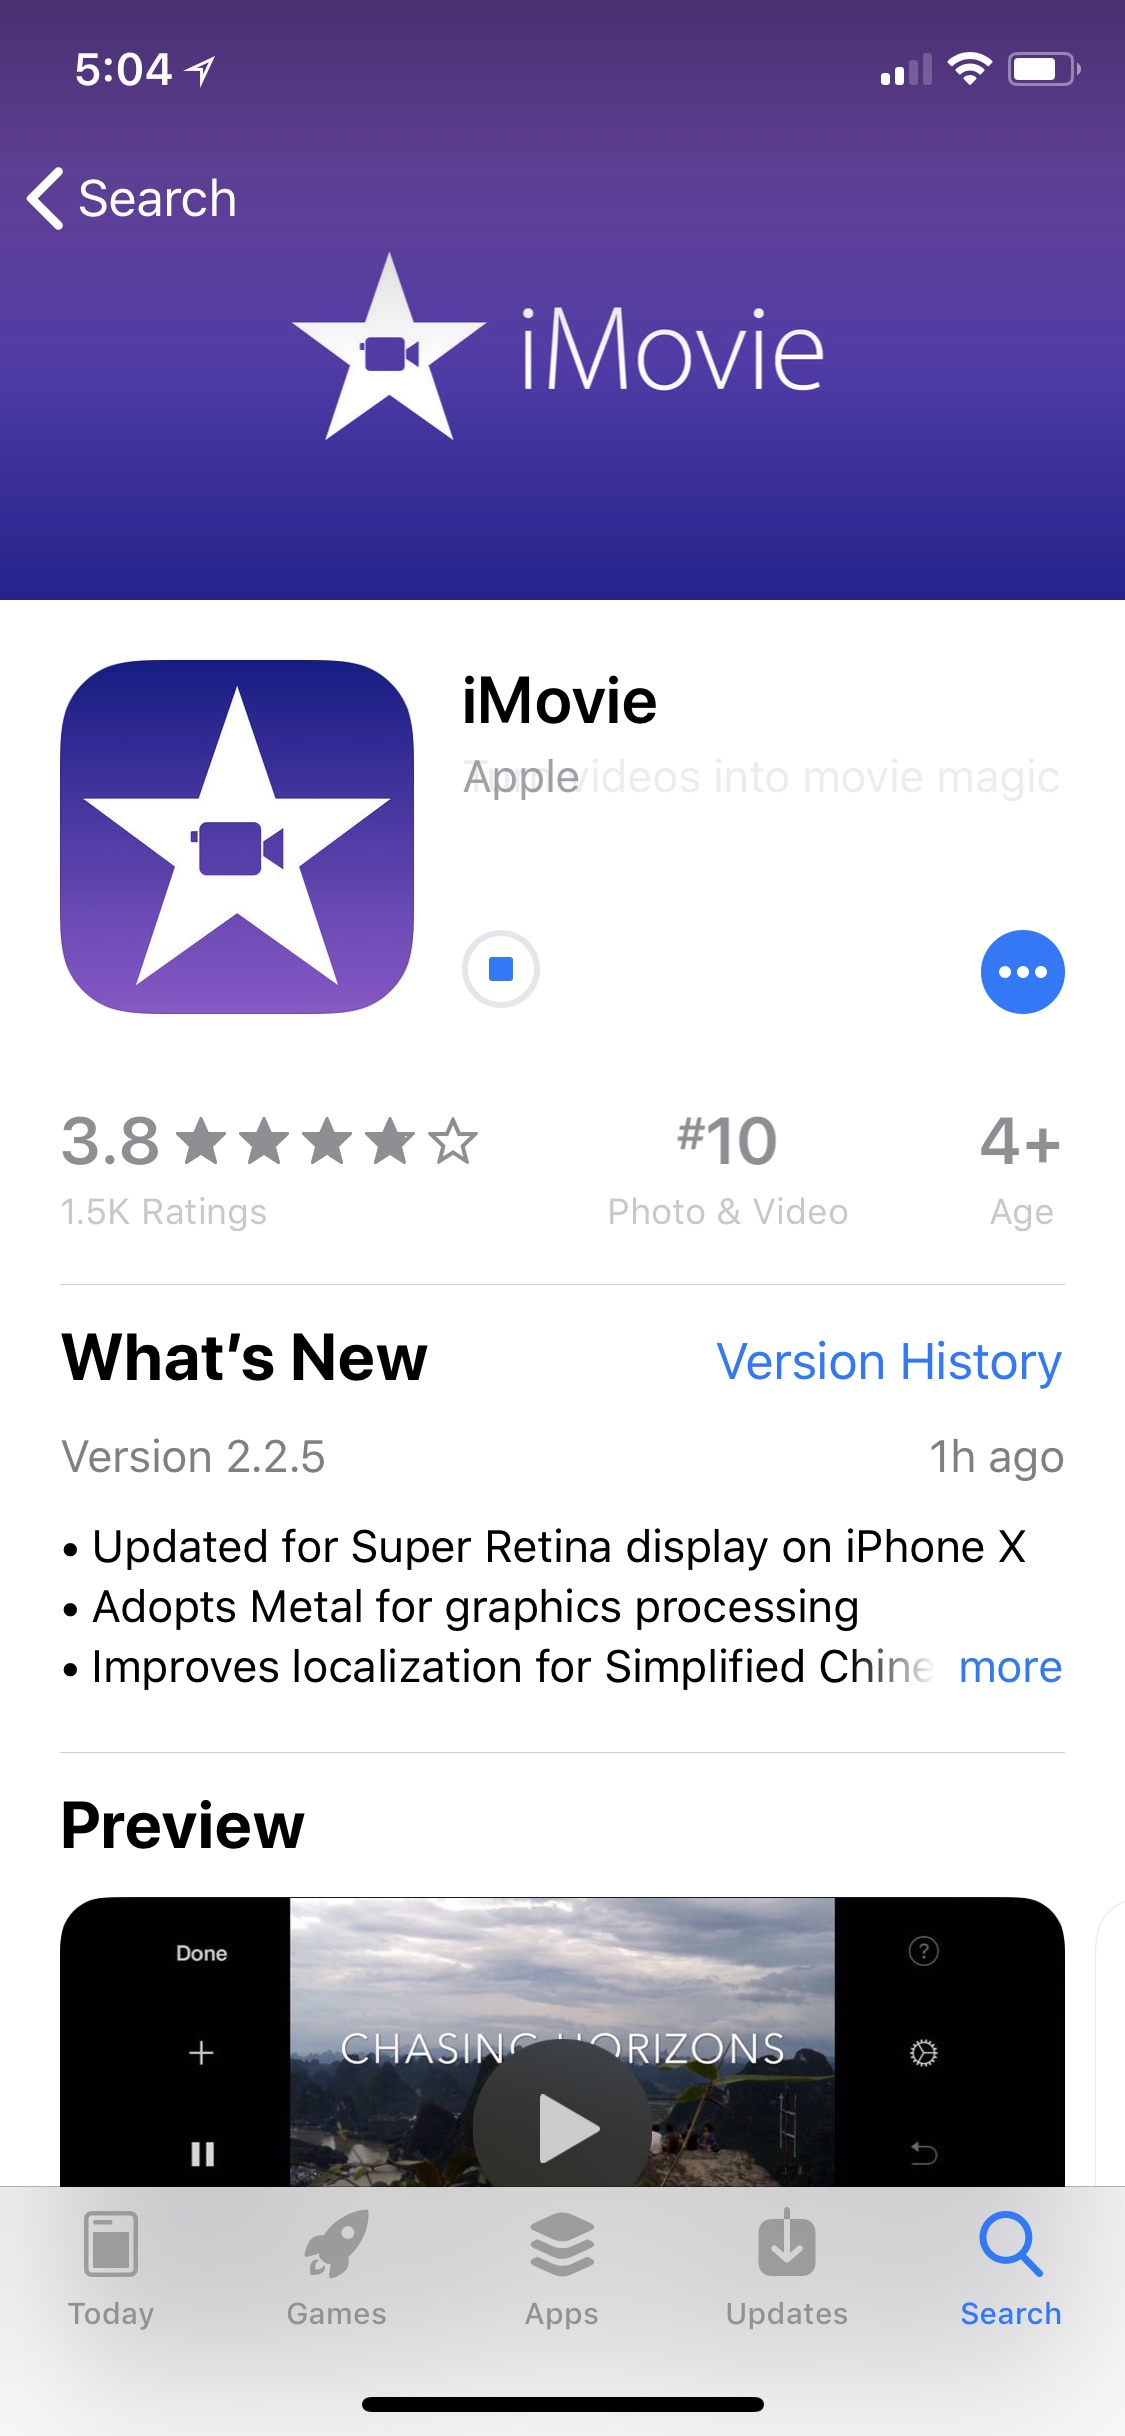 iMovie Update Brings Support for iPhone X, Adopts Metal for Graphics Processing